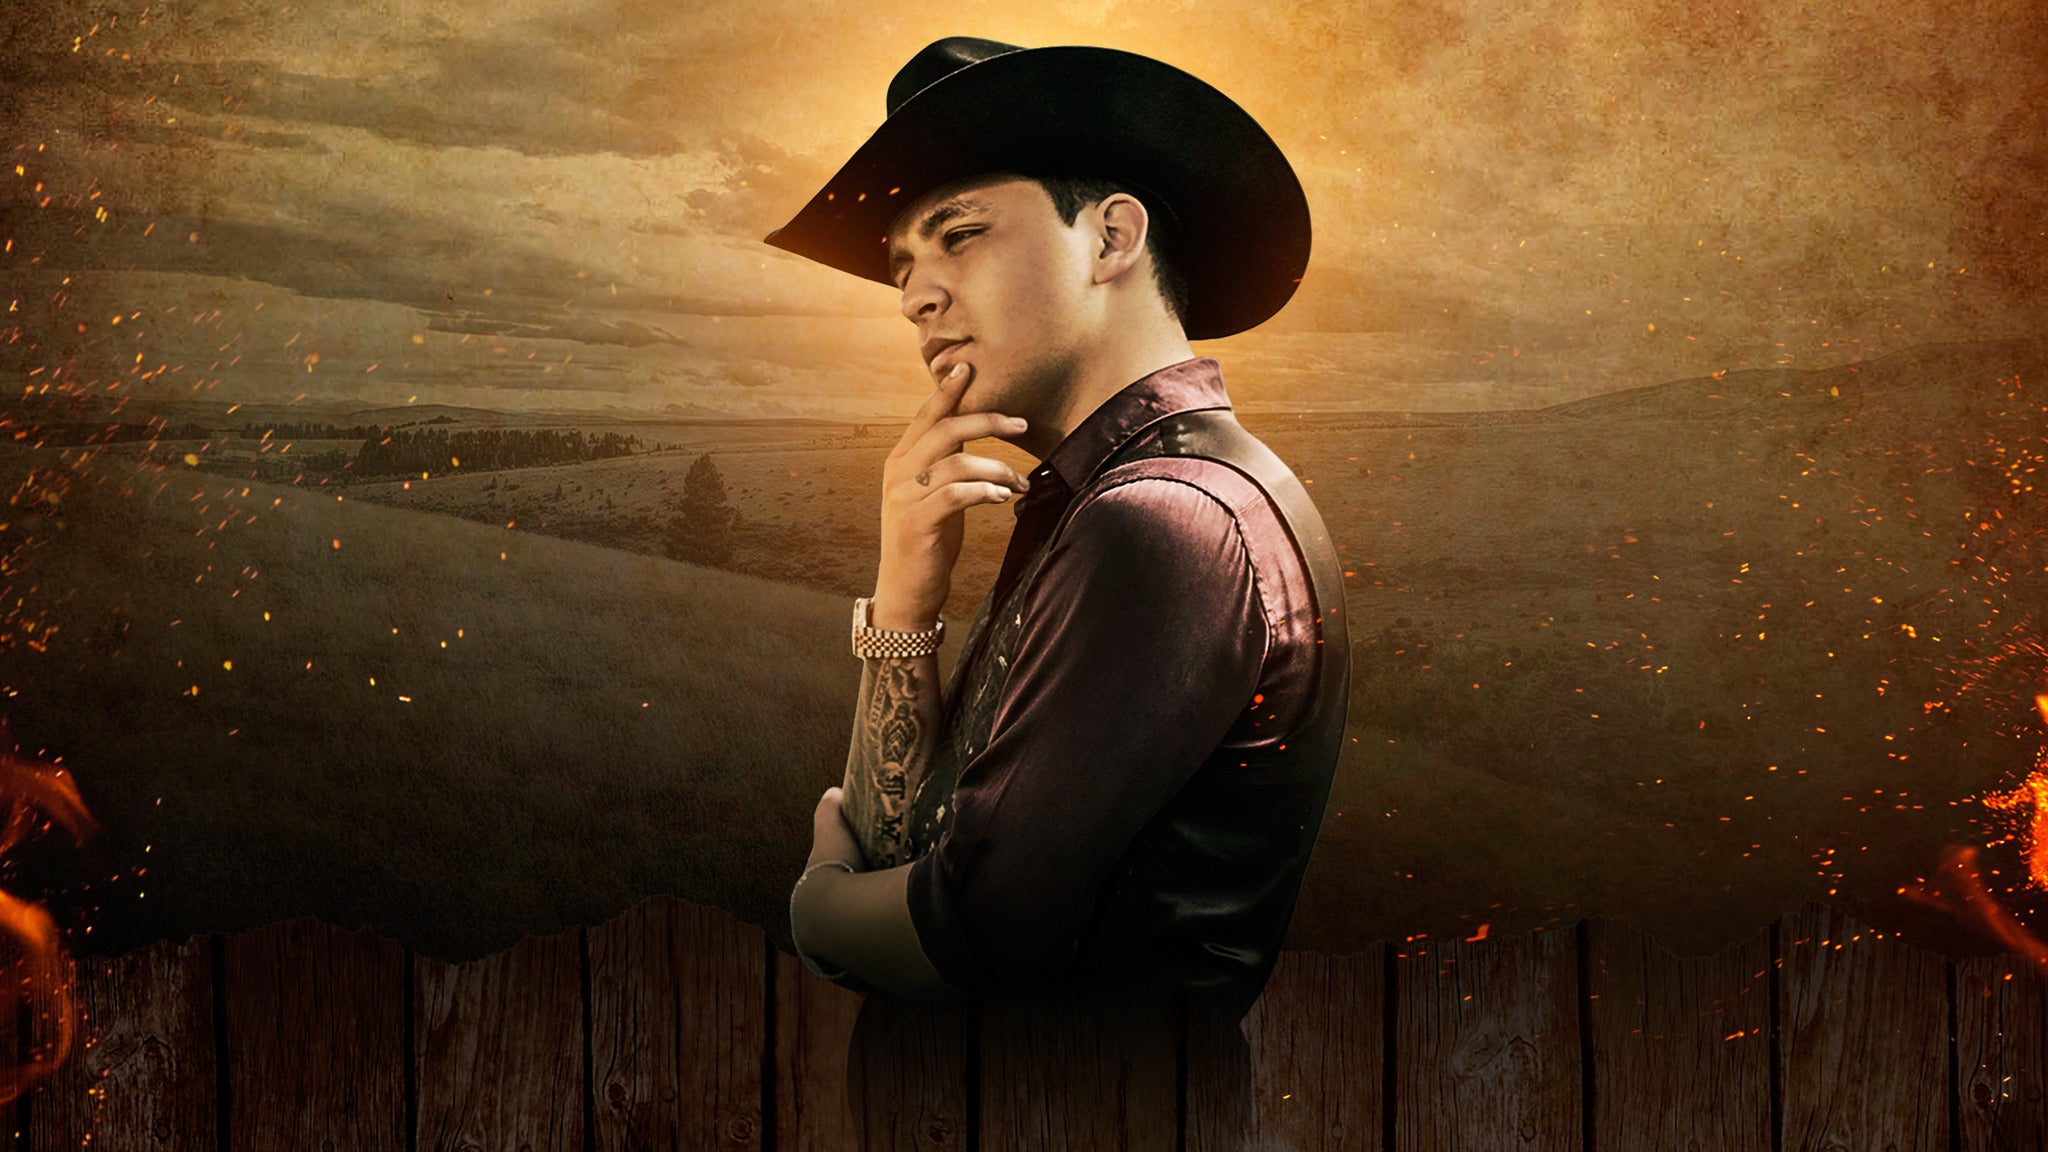 Christian Nodal with special guest Jessi Uribe in New York promo photo for Internet presale offer code